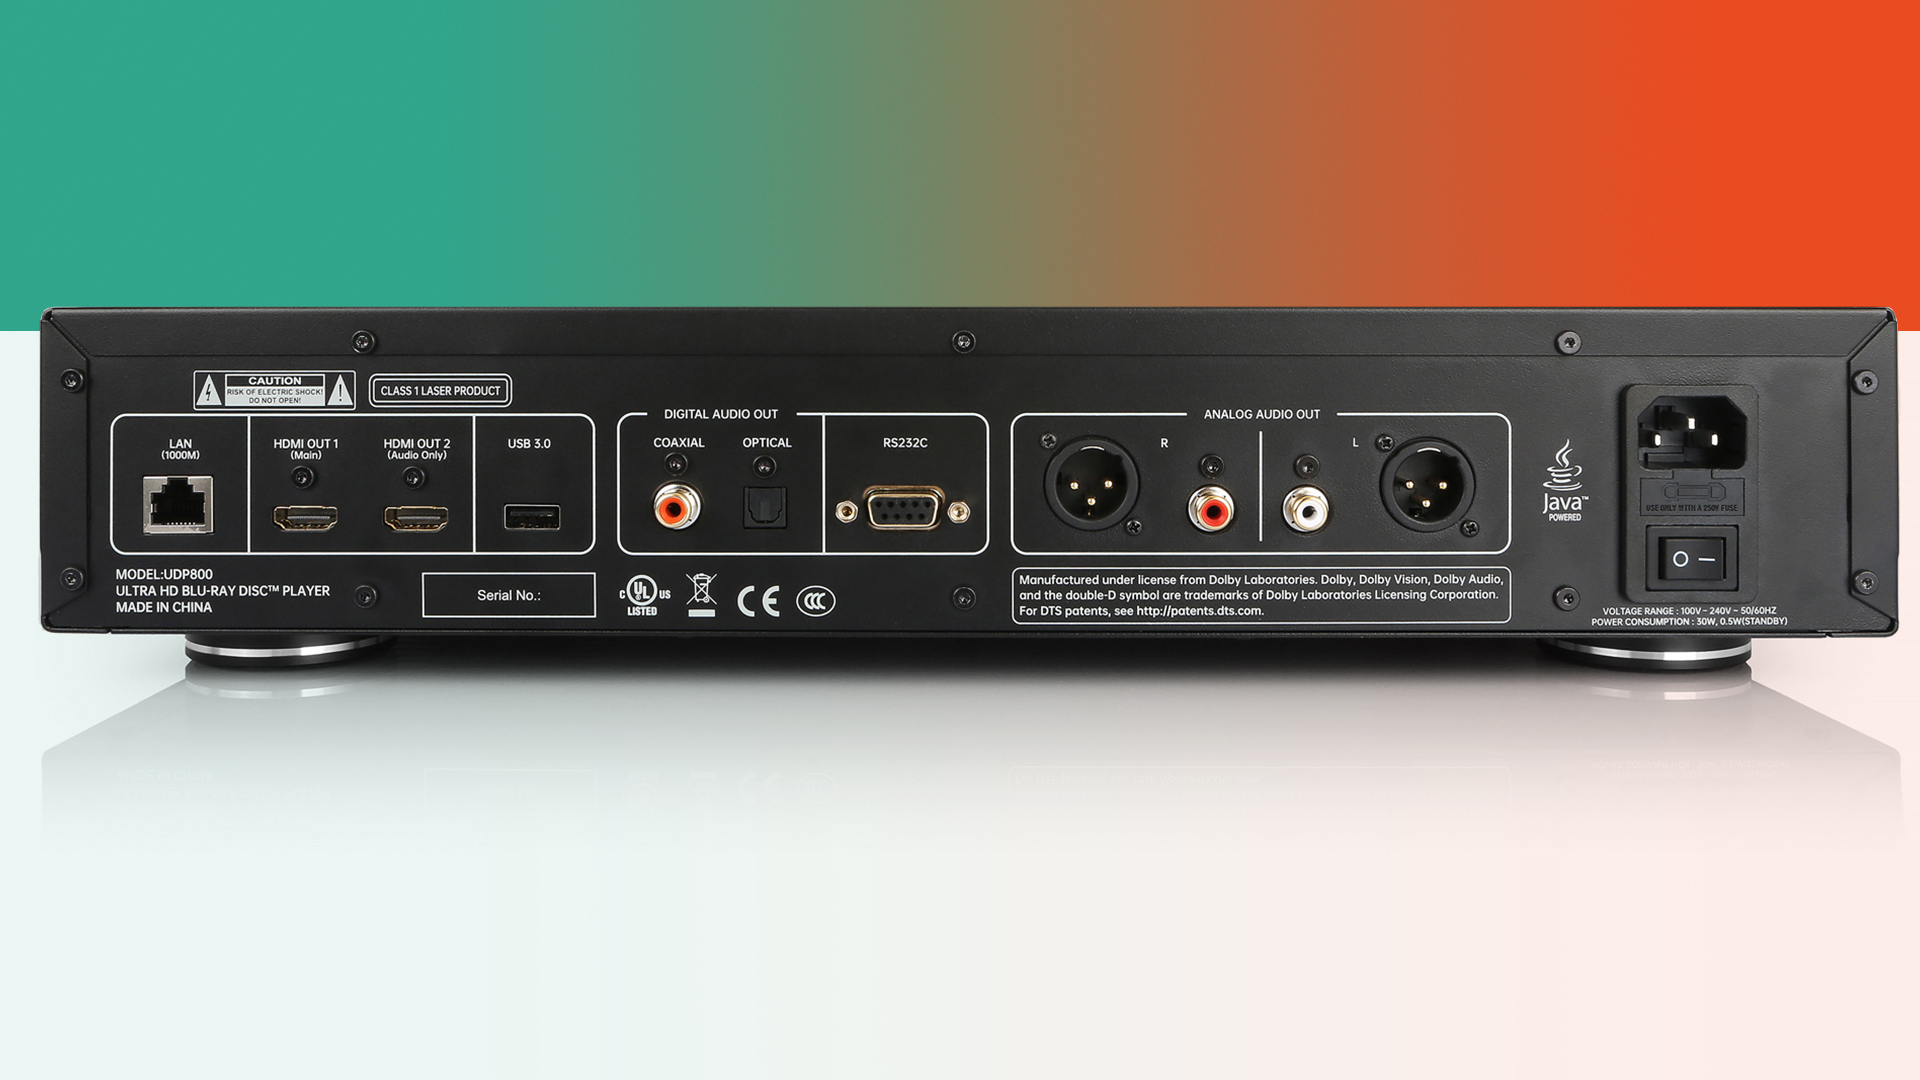 Magnetar UDP800 rear, showing all of its ports